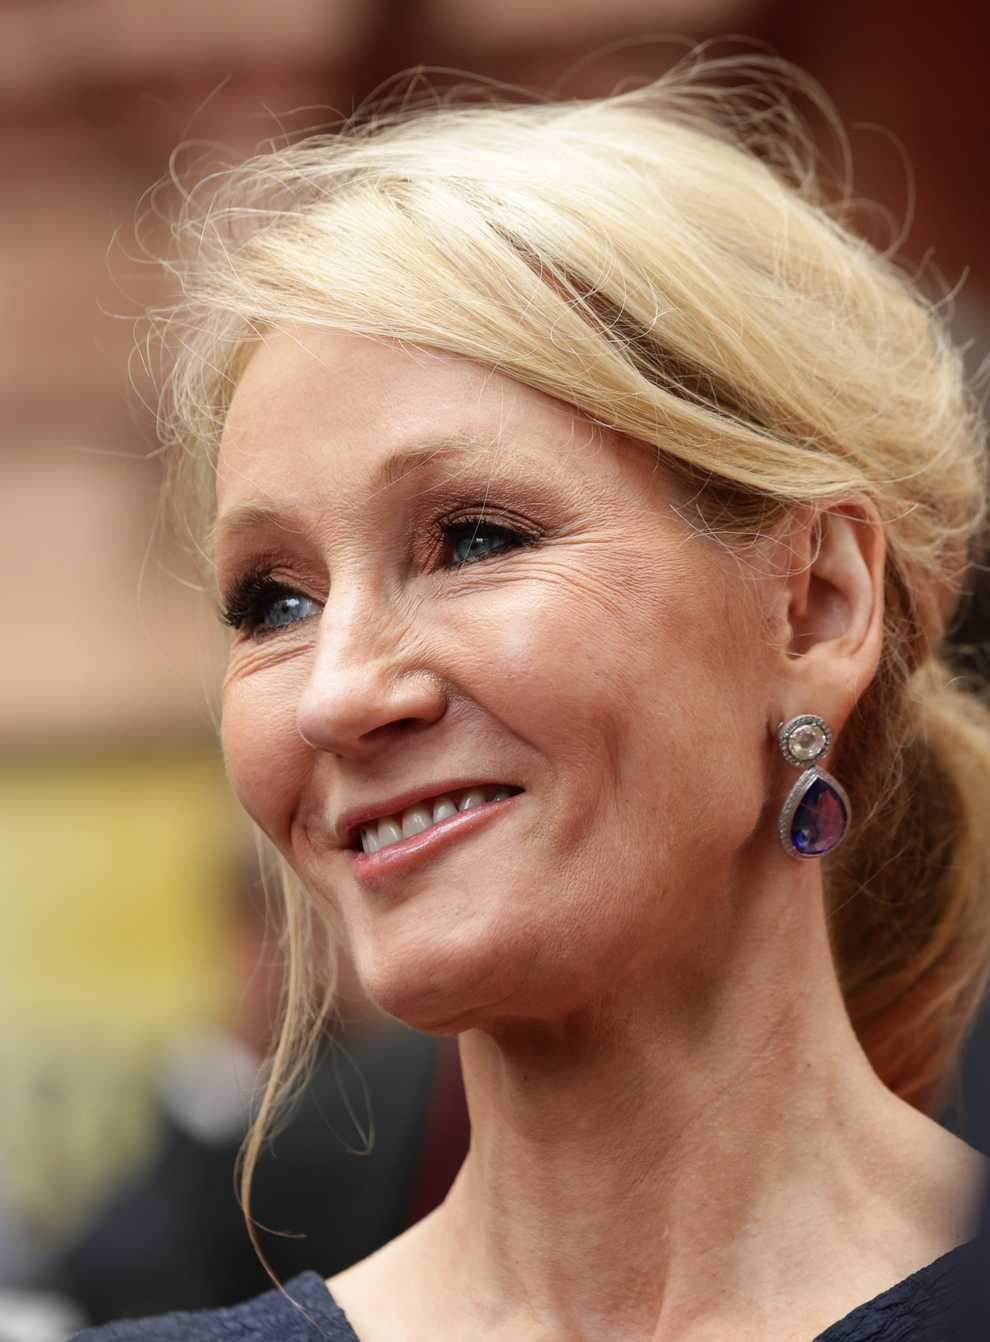 JK Rowling has joked she will have champagne and cheese on toast for the 25th anniversary of Harry Potter (Yui Mok/PA)